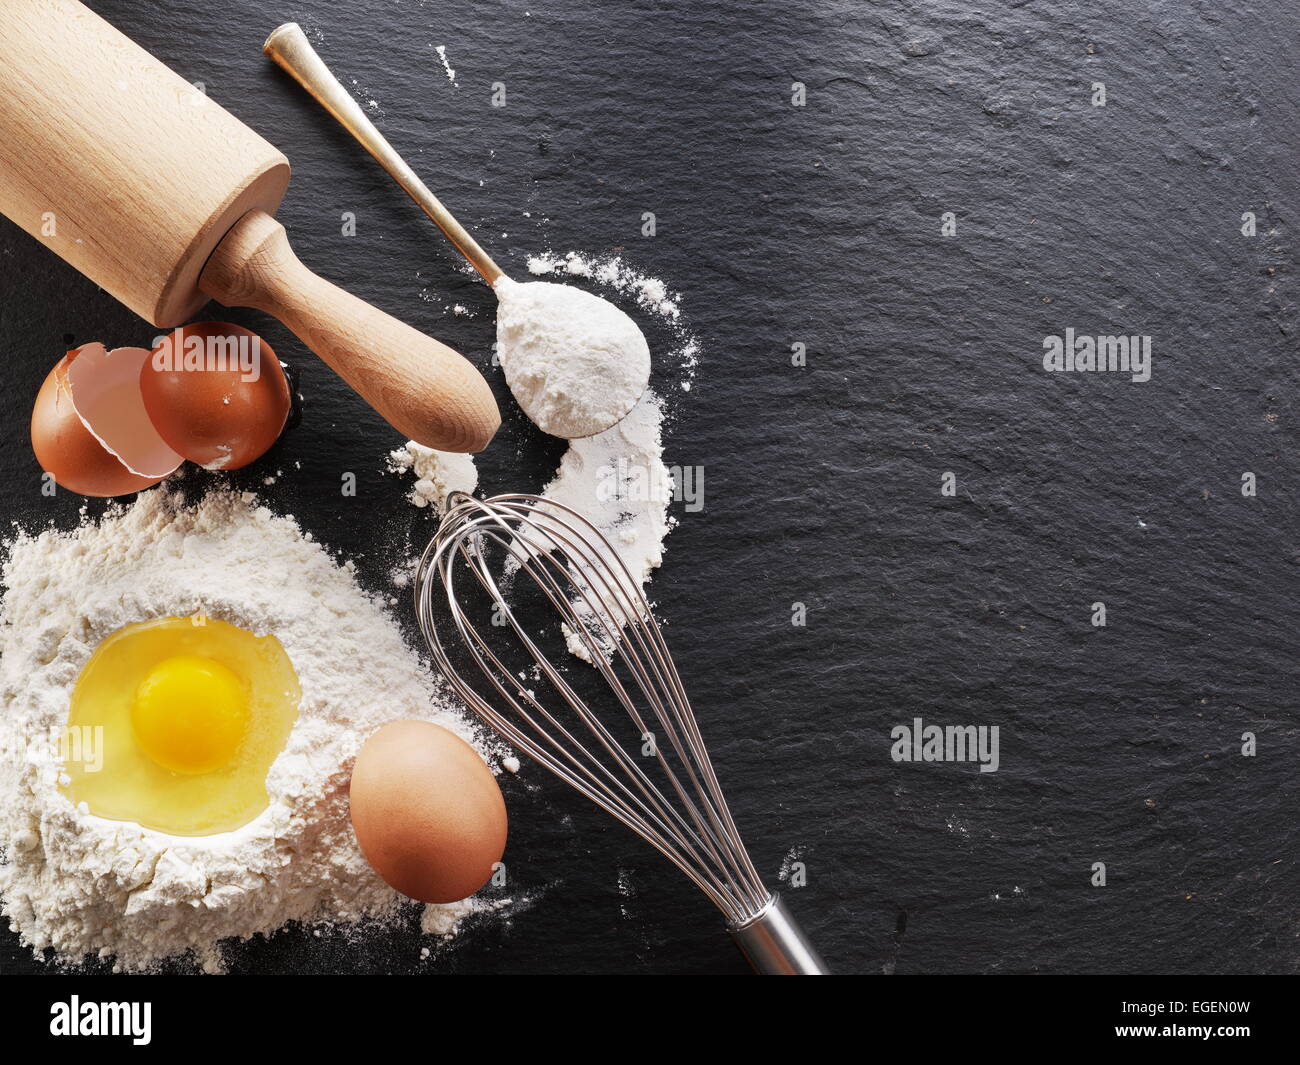 Dough preparation. Baking ingredients: egg and flour on black board. Stock Photo